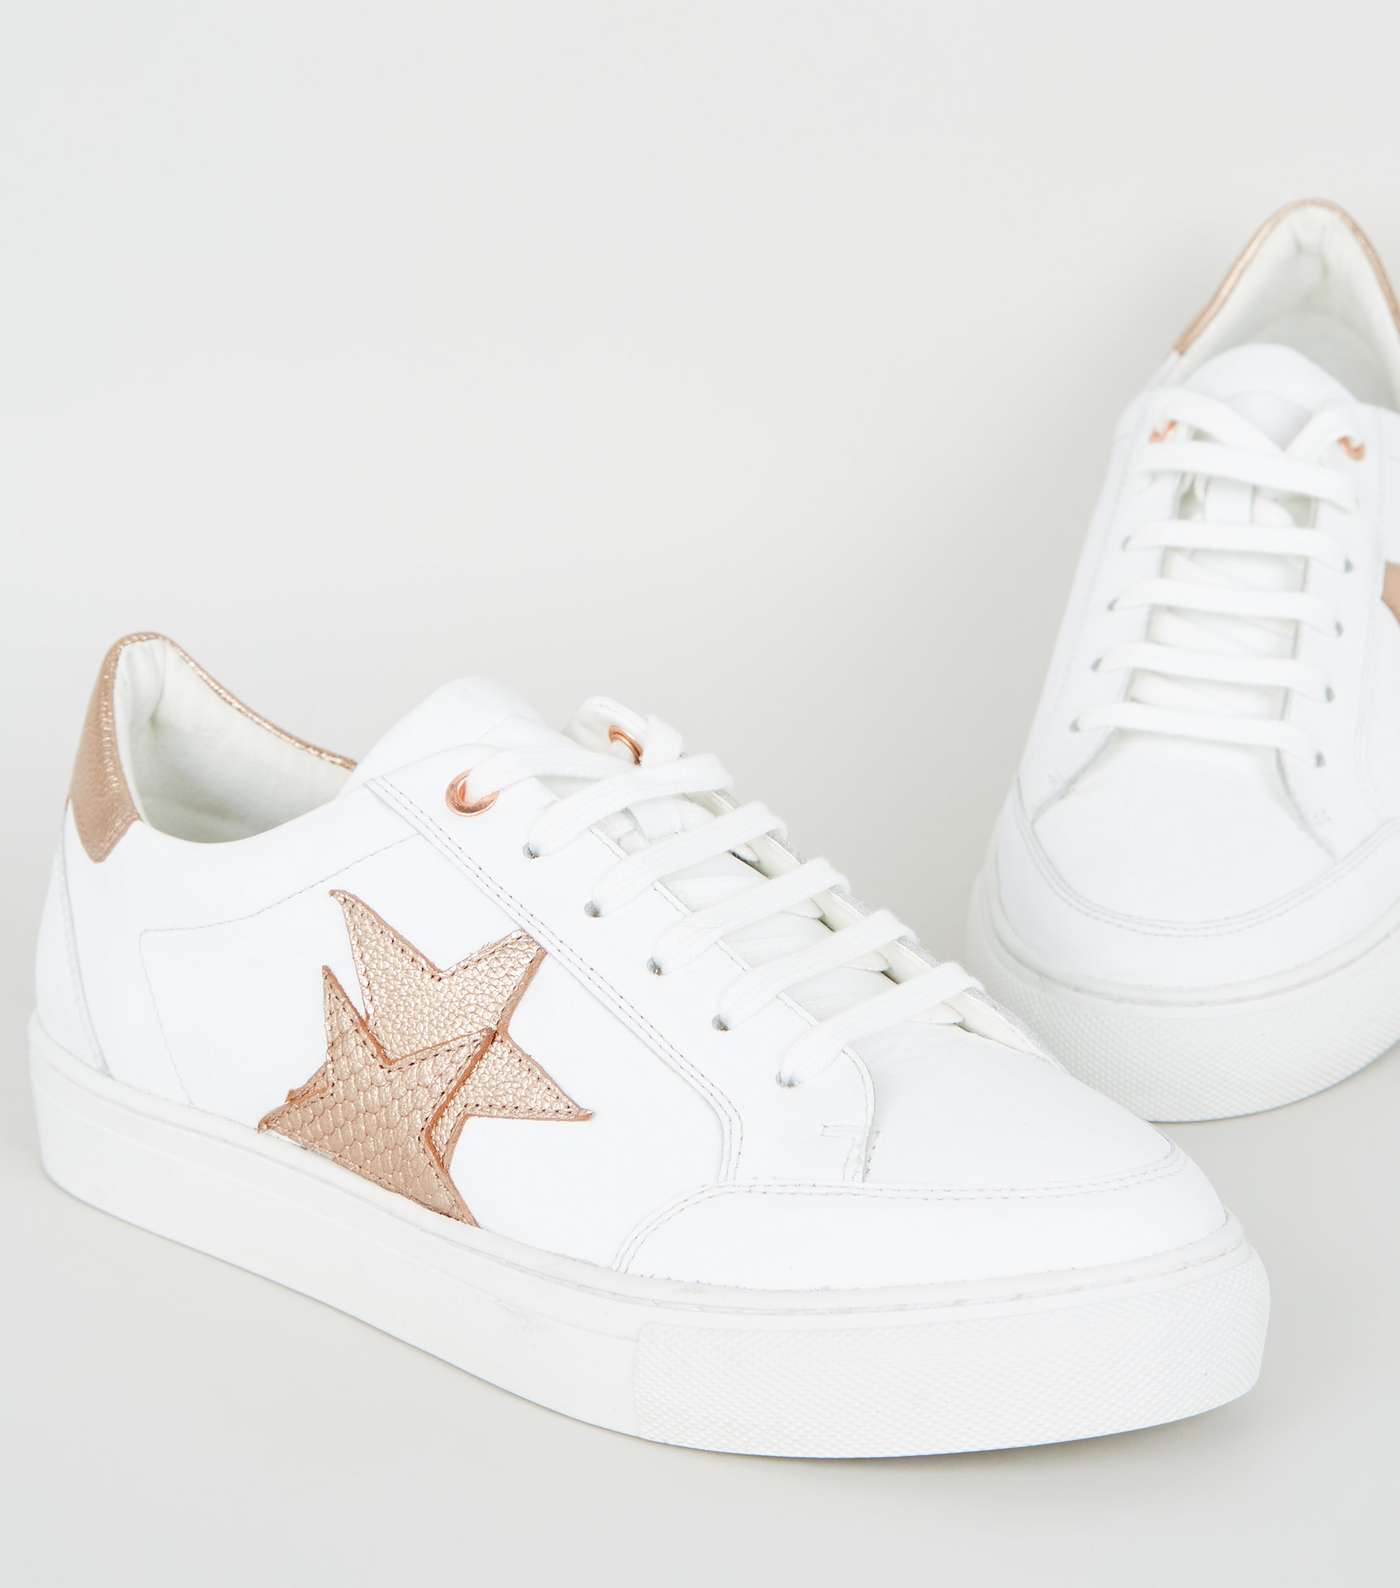 White Leather Metallic Star Side Lace Up Trainers Image 3